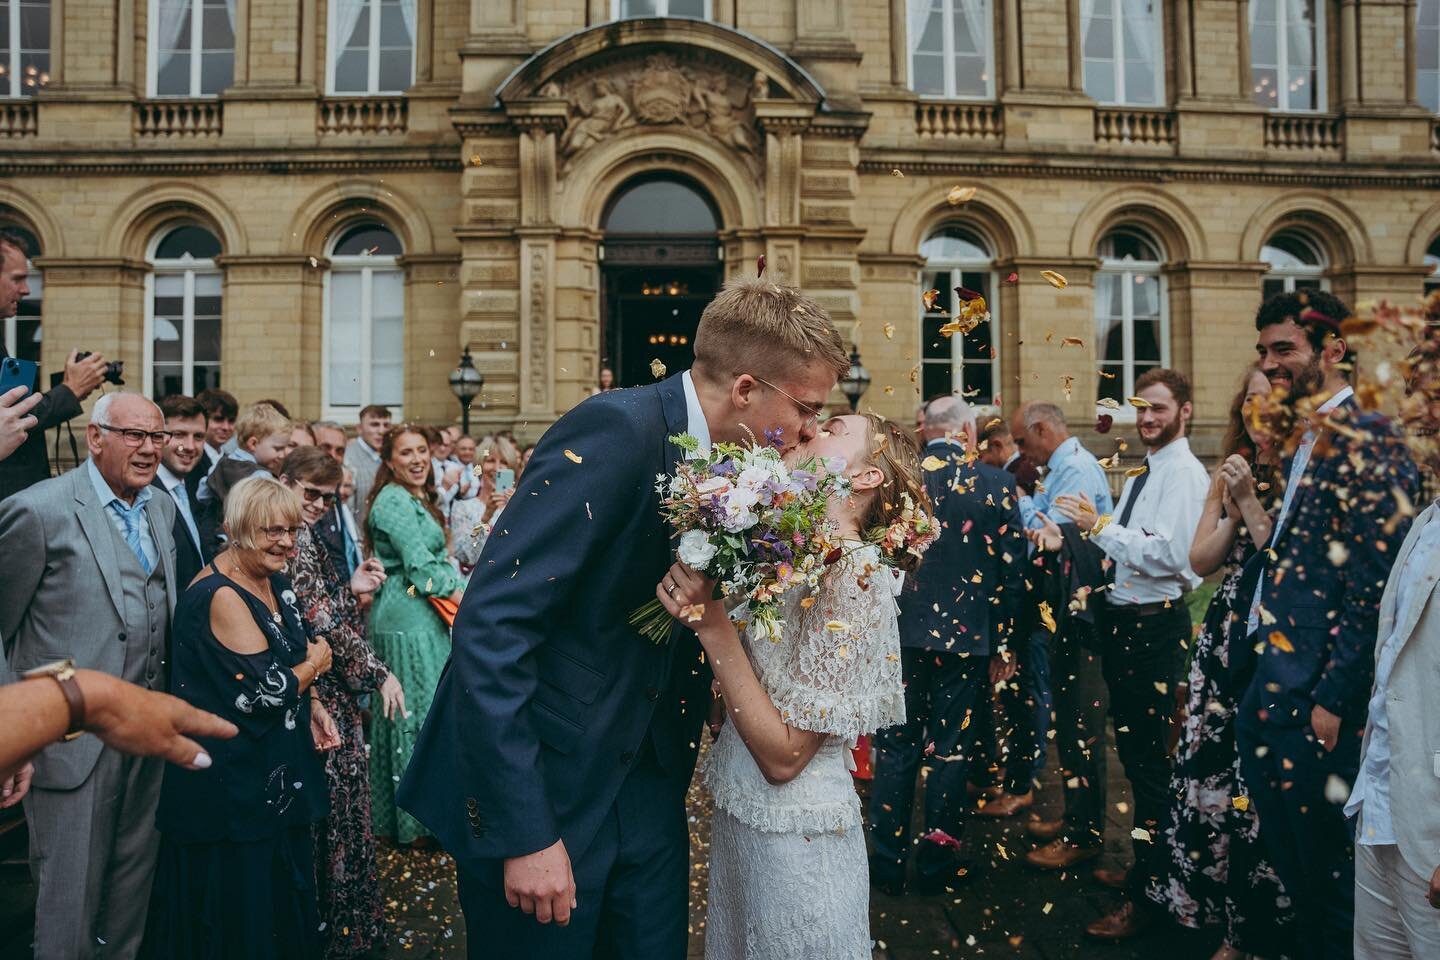 A huge congratulations to Andrew &amp; Alice who celebrated here at Victoria Hall recently. 

Beautiful photos as always from @silver_and_light_weddings